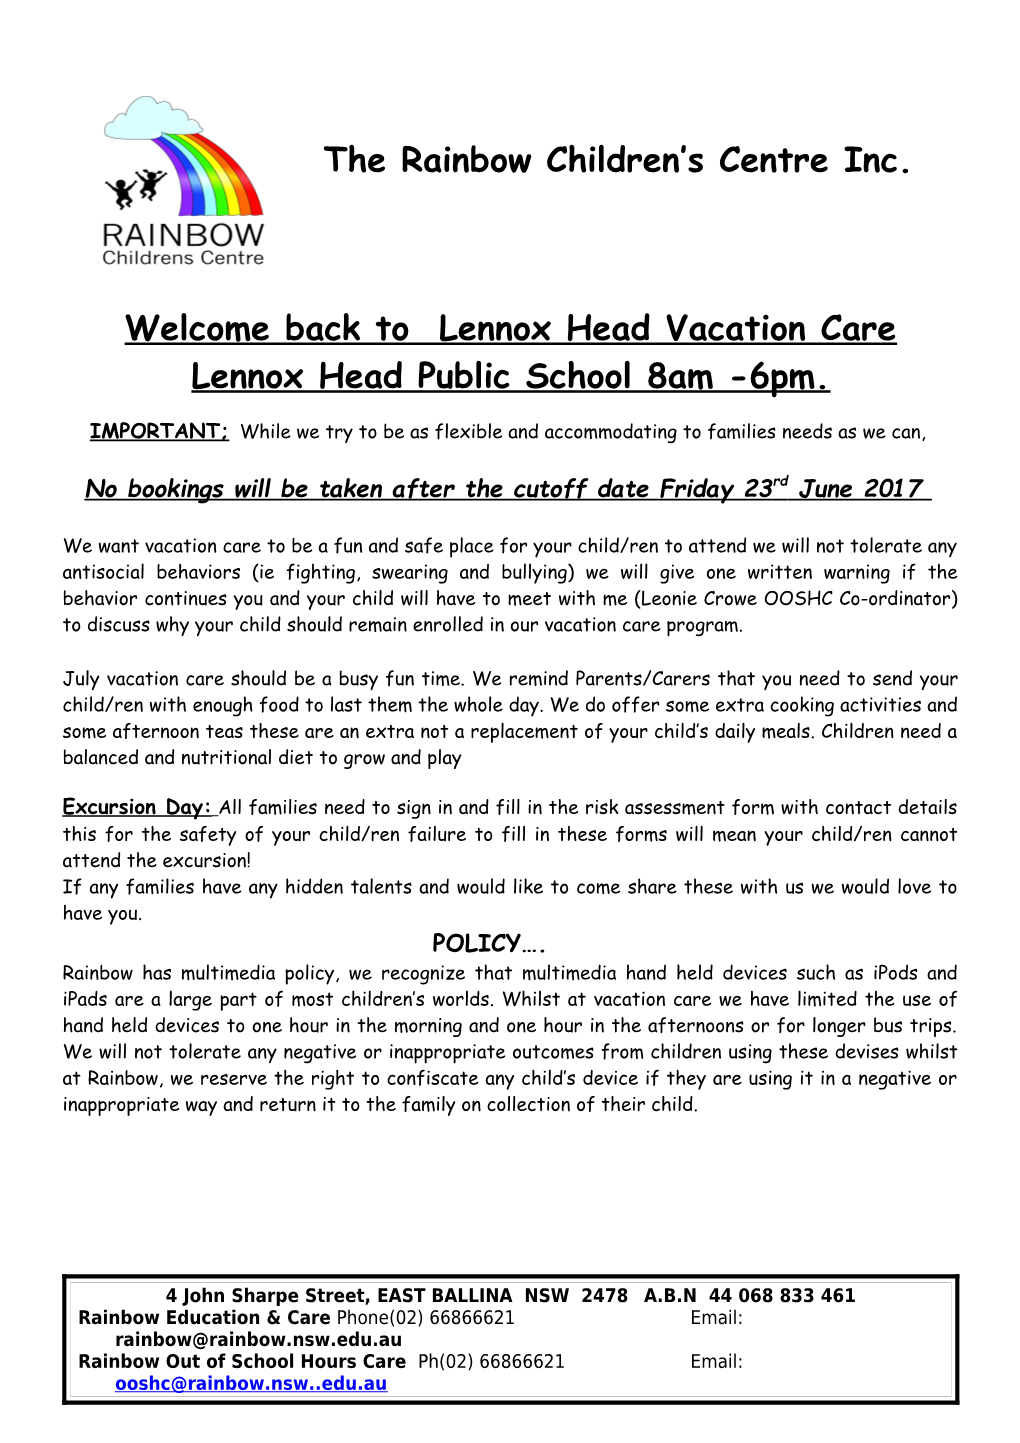 Welcome Back to Lennox Head Vacation Care